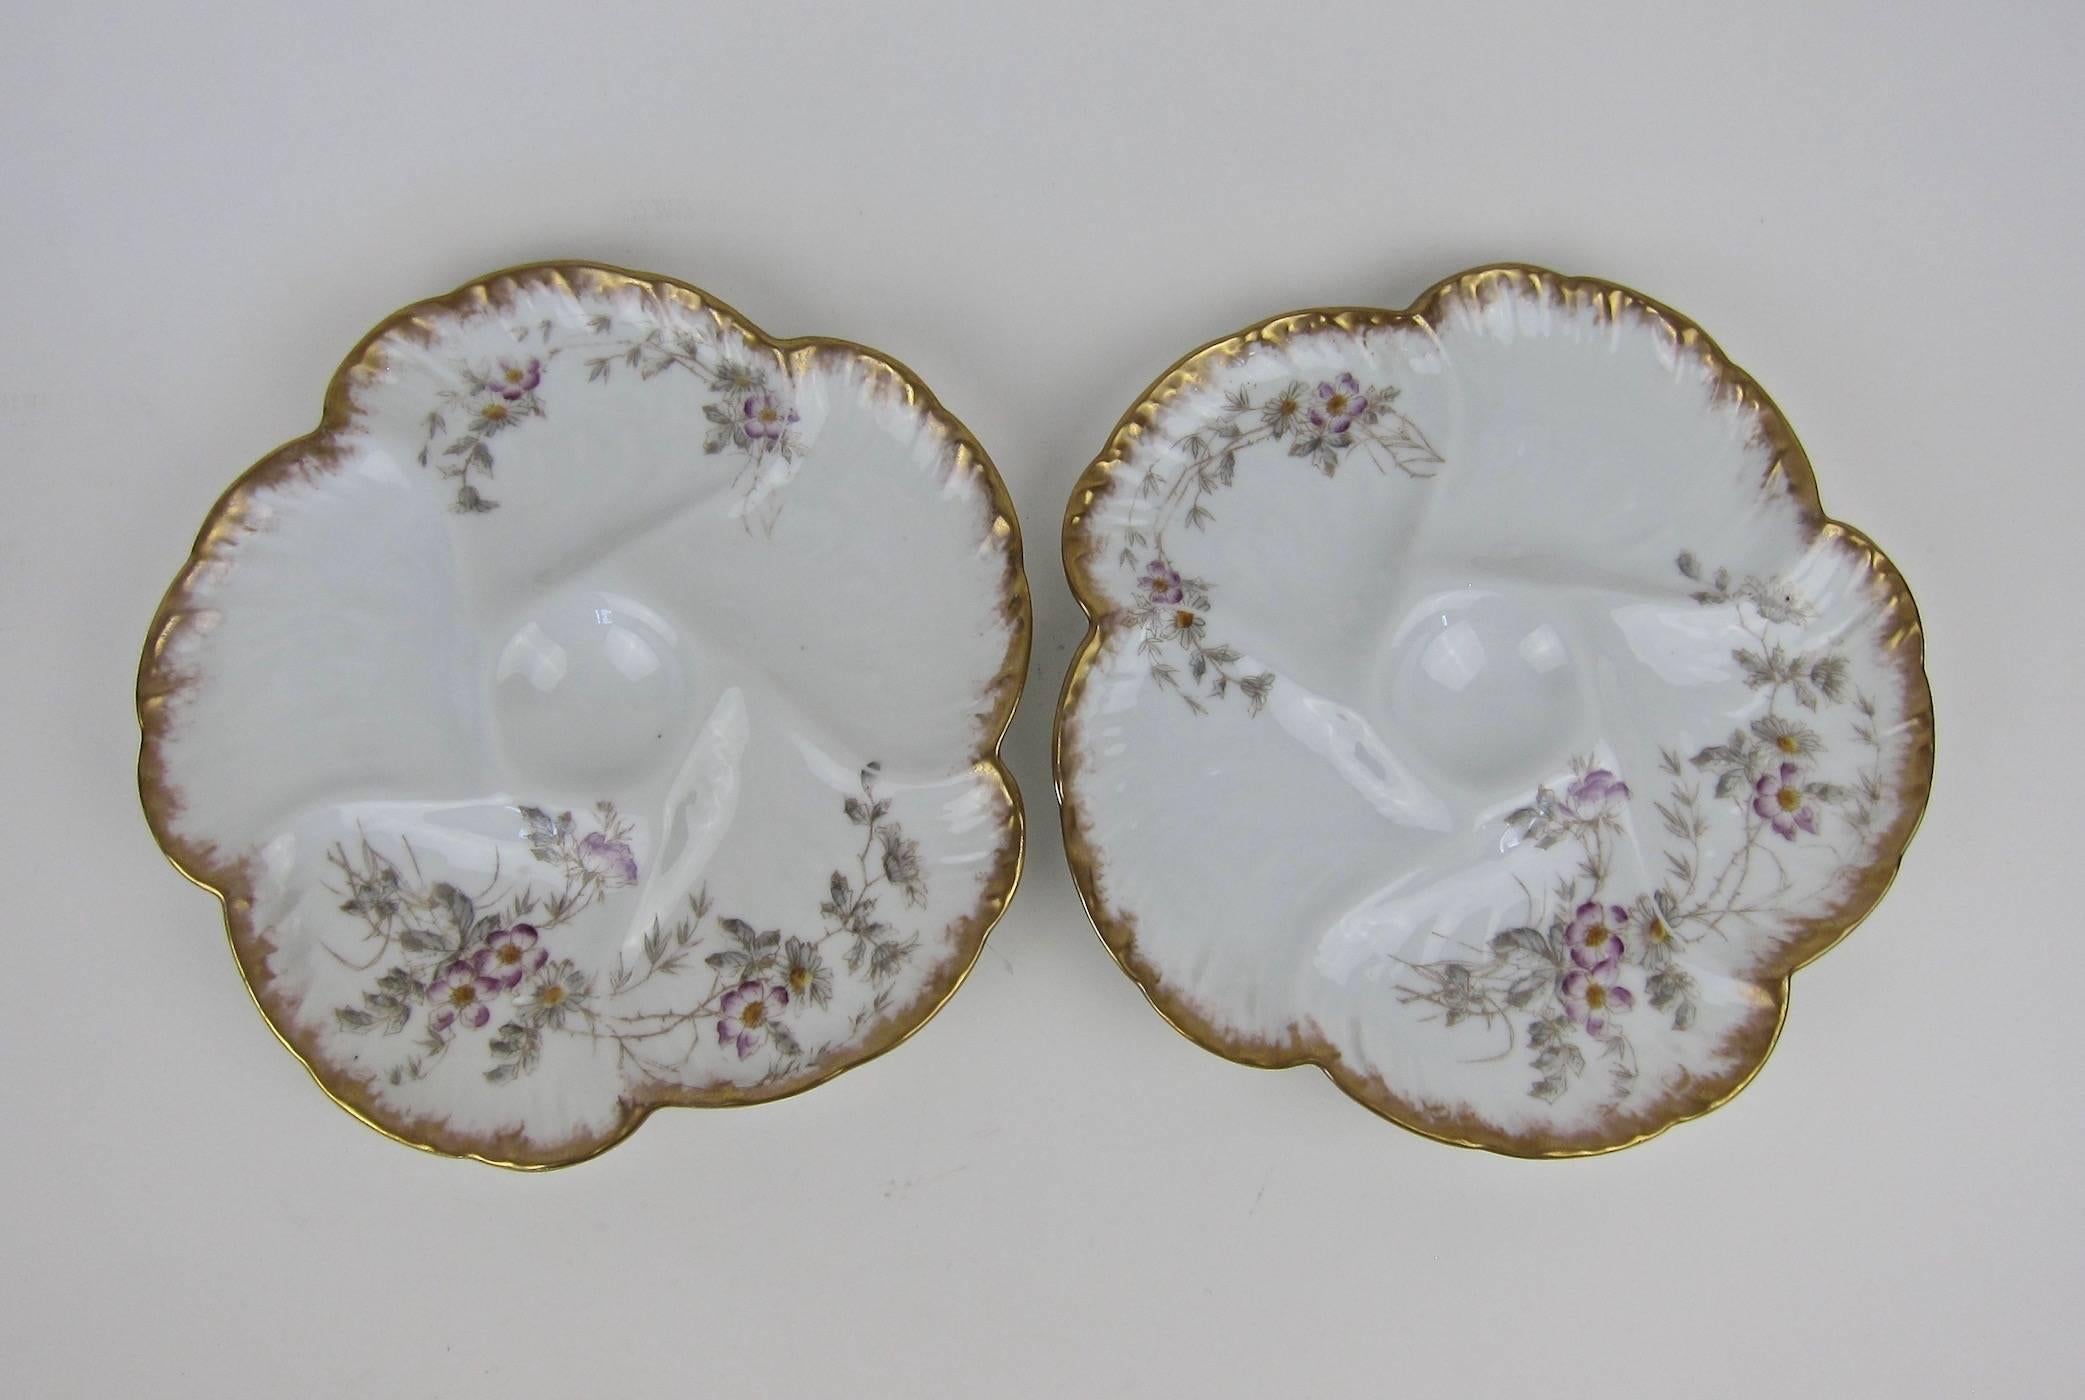 Hand-Painted Antique Limoges Porcelain Oyster Plates by CFH / GDM, 1880s